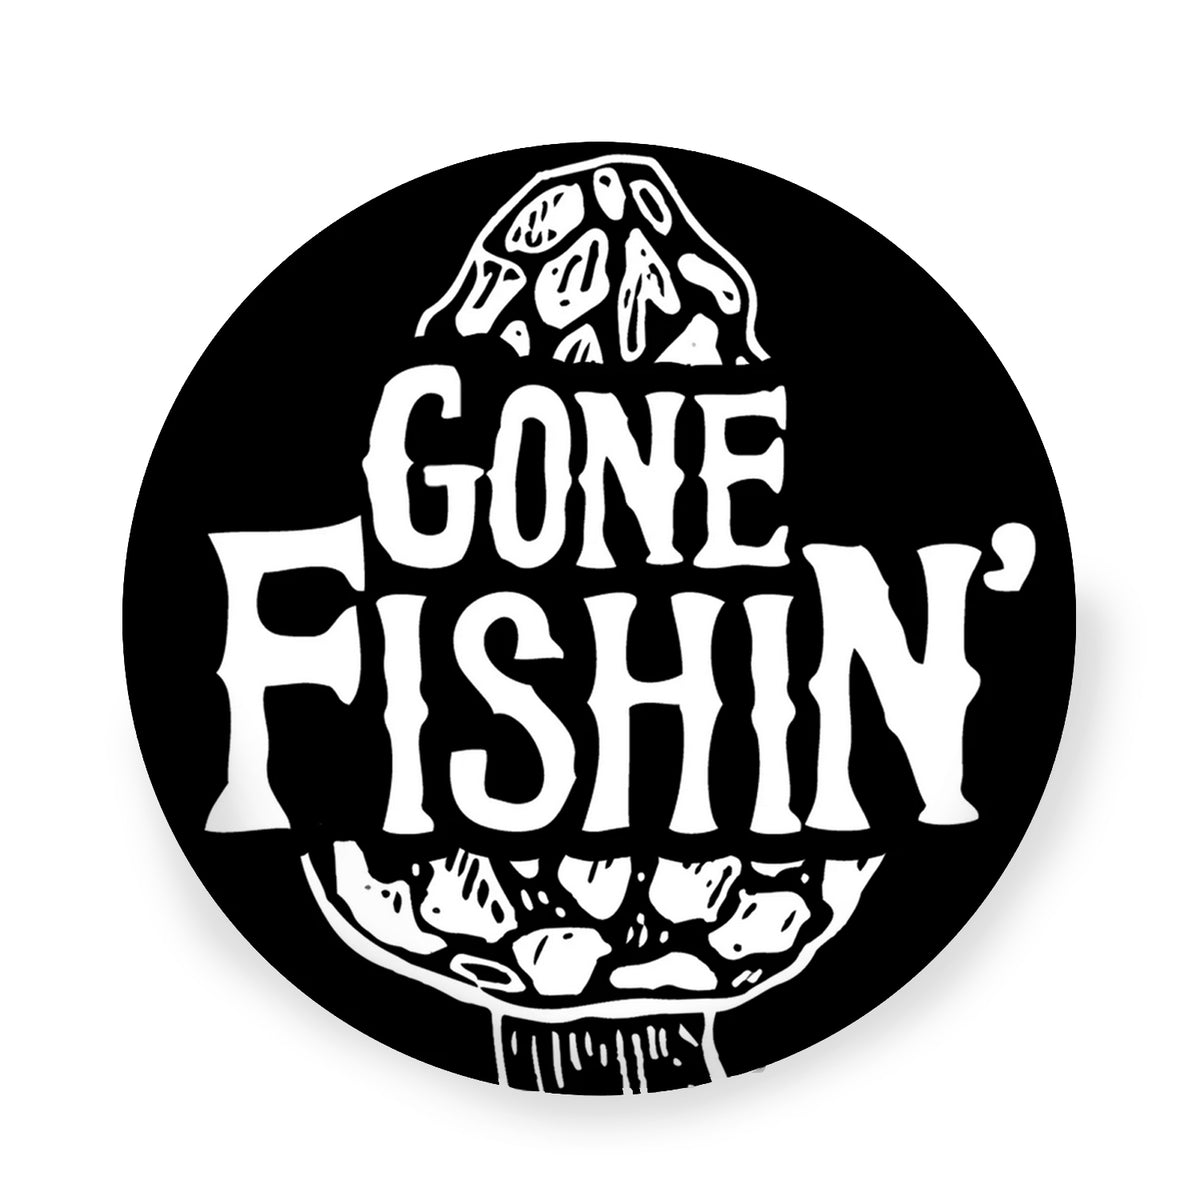 Gone Fishing Sticker Decal Bumper Sticker Boat Decal – The Civil Right